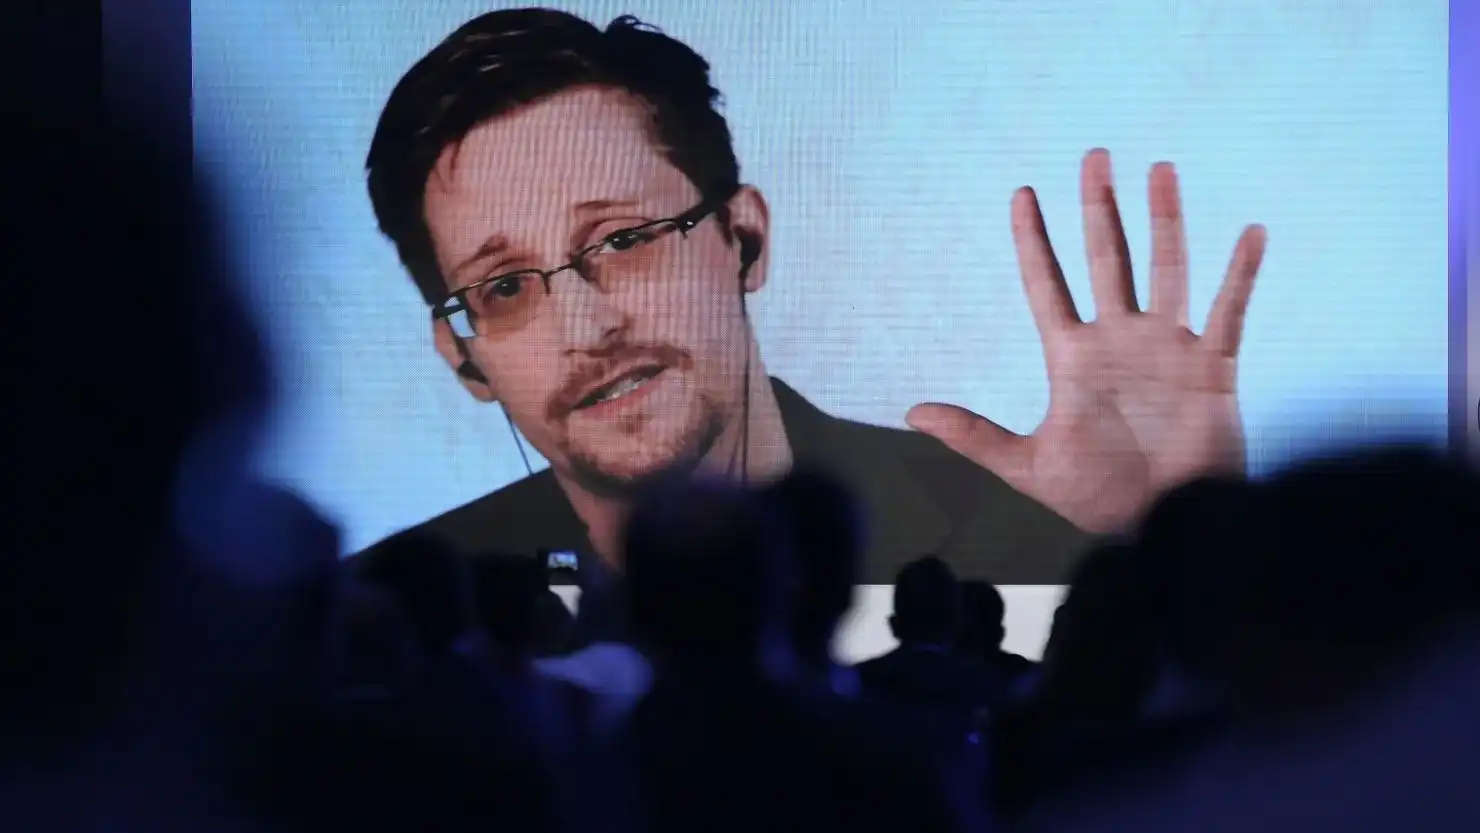 Edward Snowden: Bitcoin, the Most Significant Monetary Advance Since Coinage